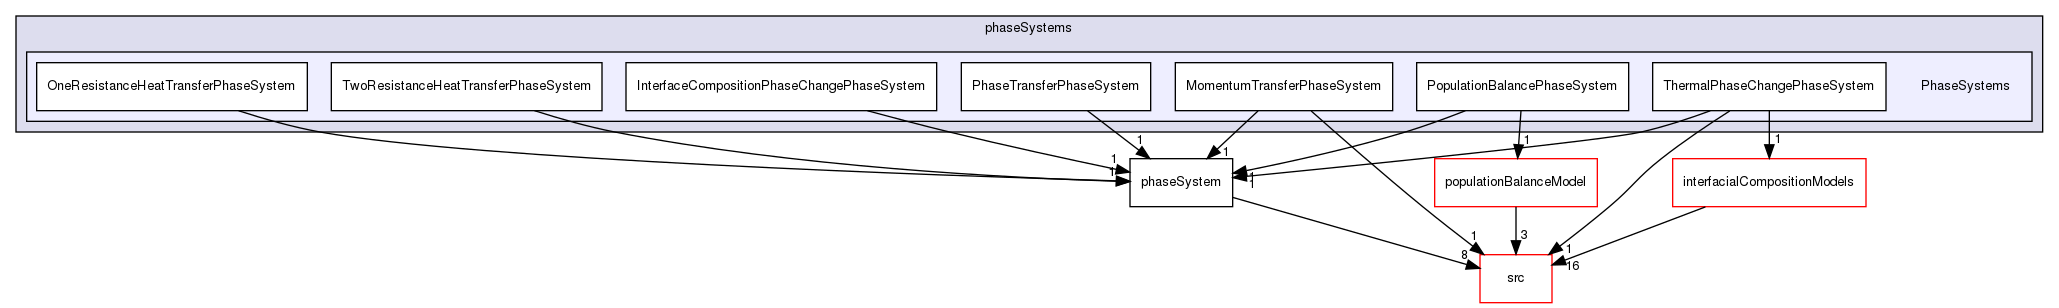 applications/solvers/multiphase/reactingEulerFoam/phaseSystems/PhaseSystems